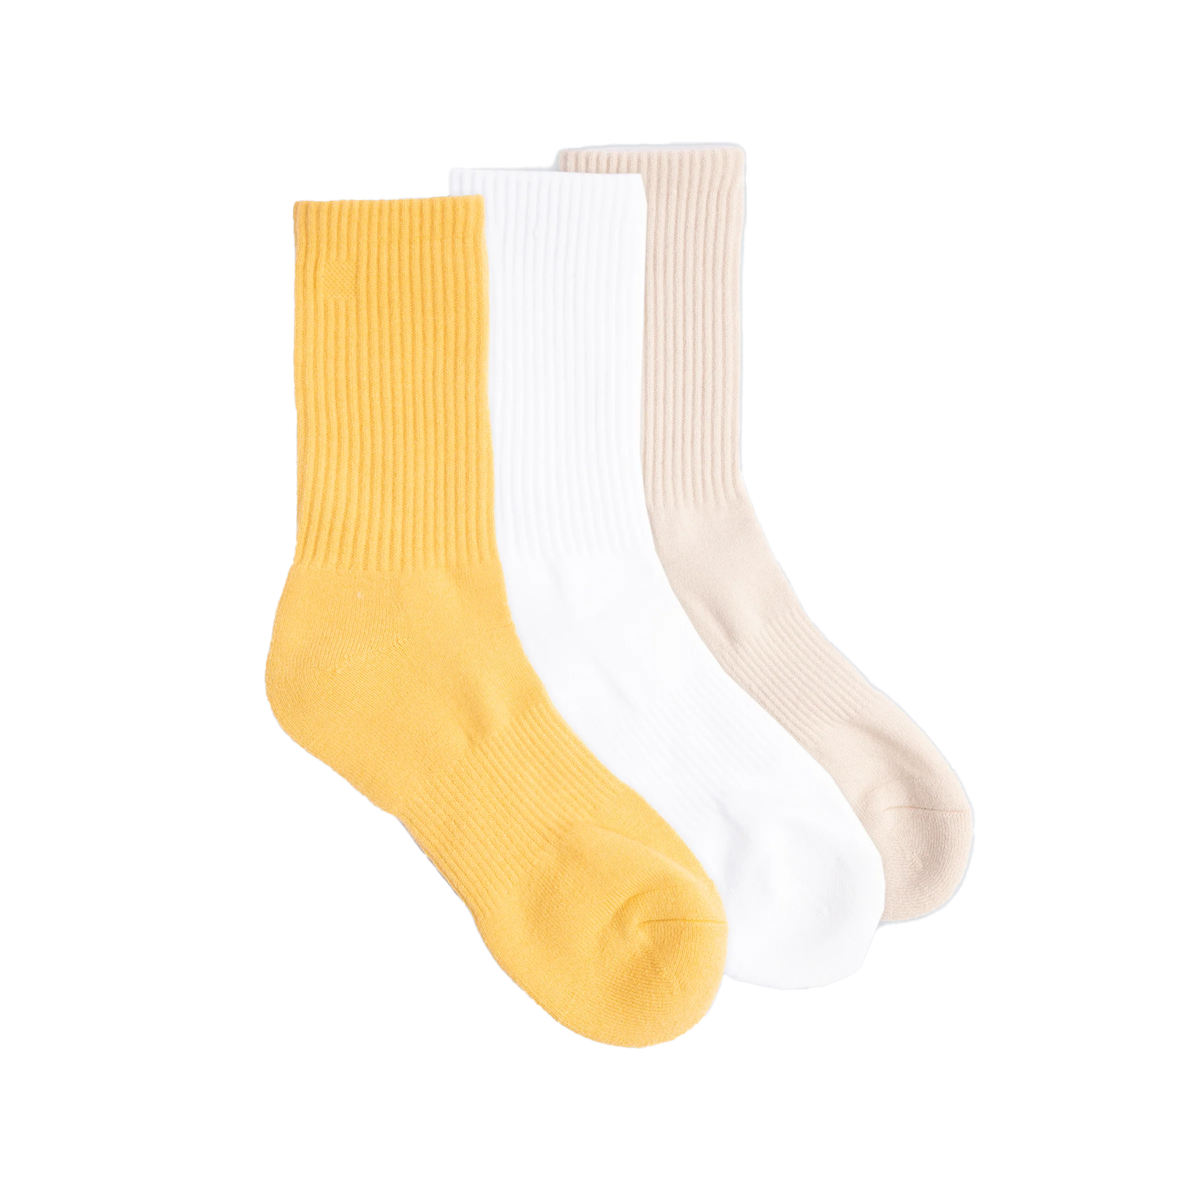 Coal The Everyday Crew Sock Three Pack - Assorted Colors